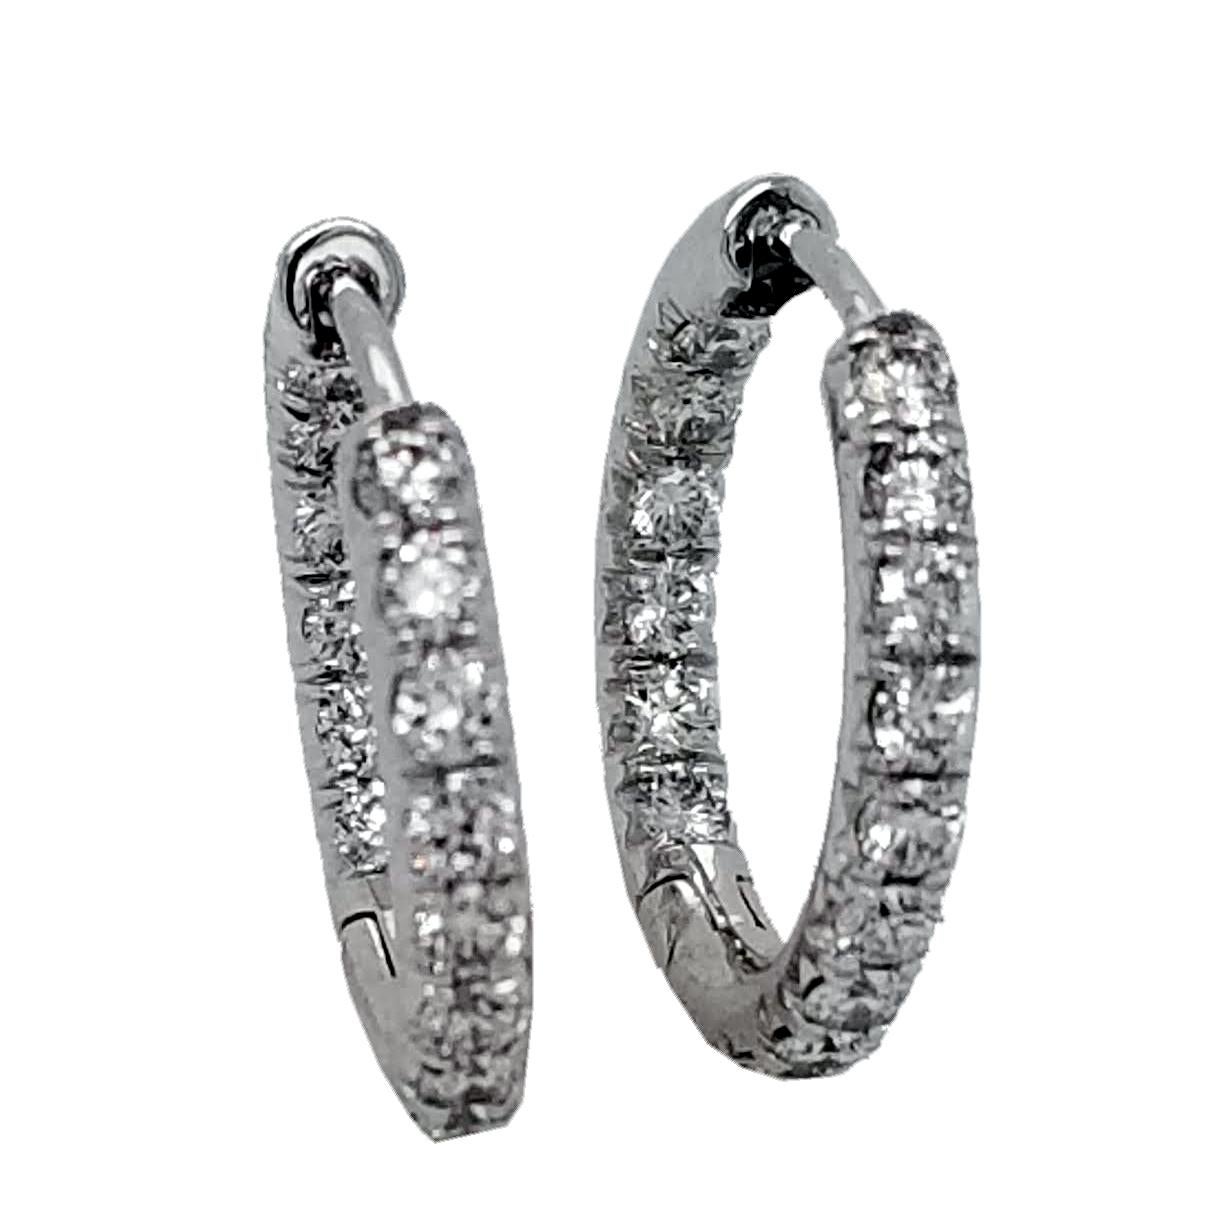 This beautiful 14K Gold Inside/Outside hoop earrings (Huggies) has 32 round brilliant diamonds with total weight of 0.81 Ct set in French Pave style for maximum brilliance. The earring is 16 mm in diameter.